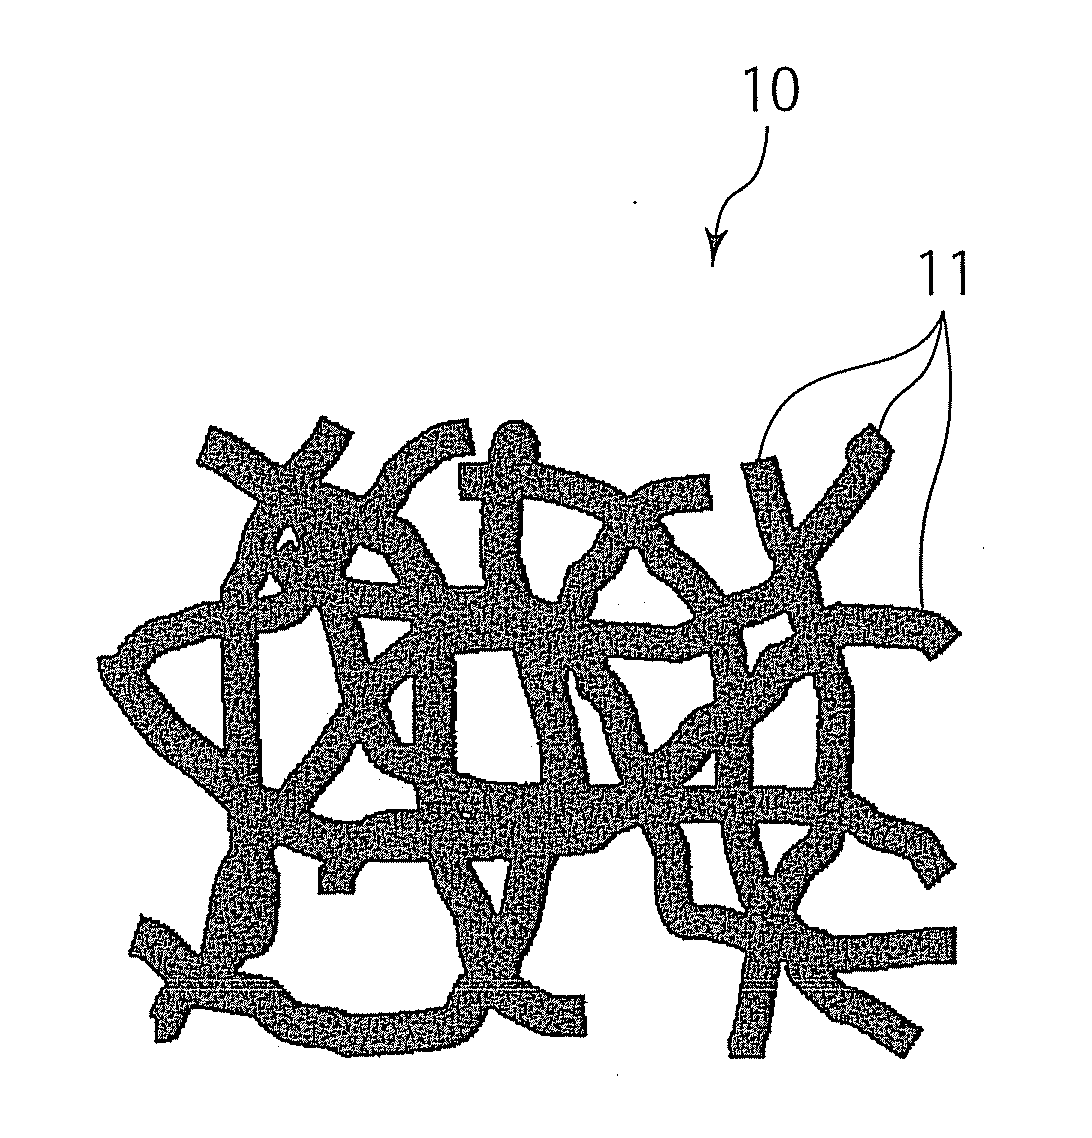 Porous metal foil and production method therefor